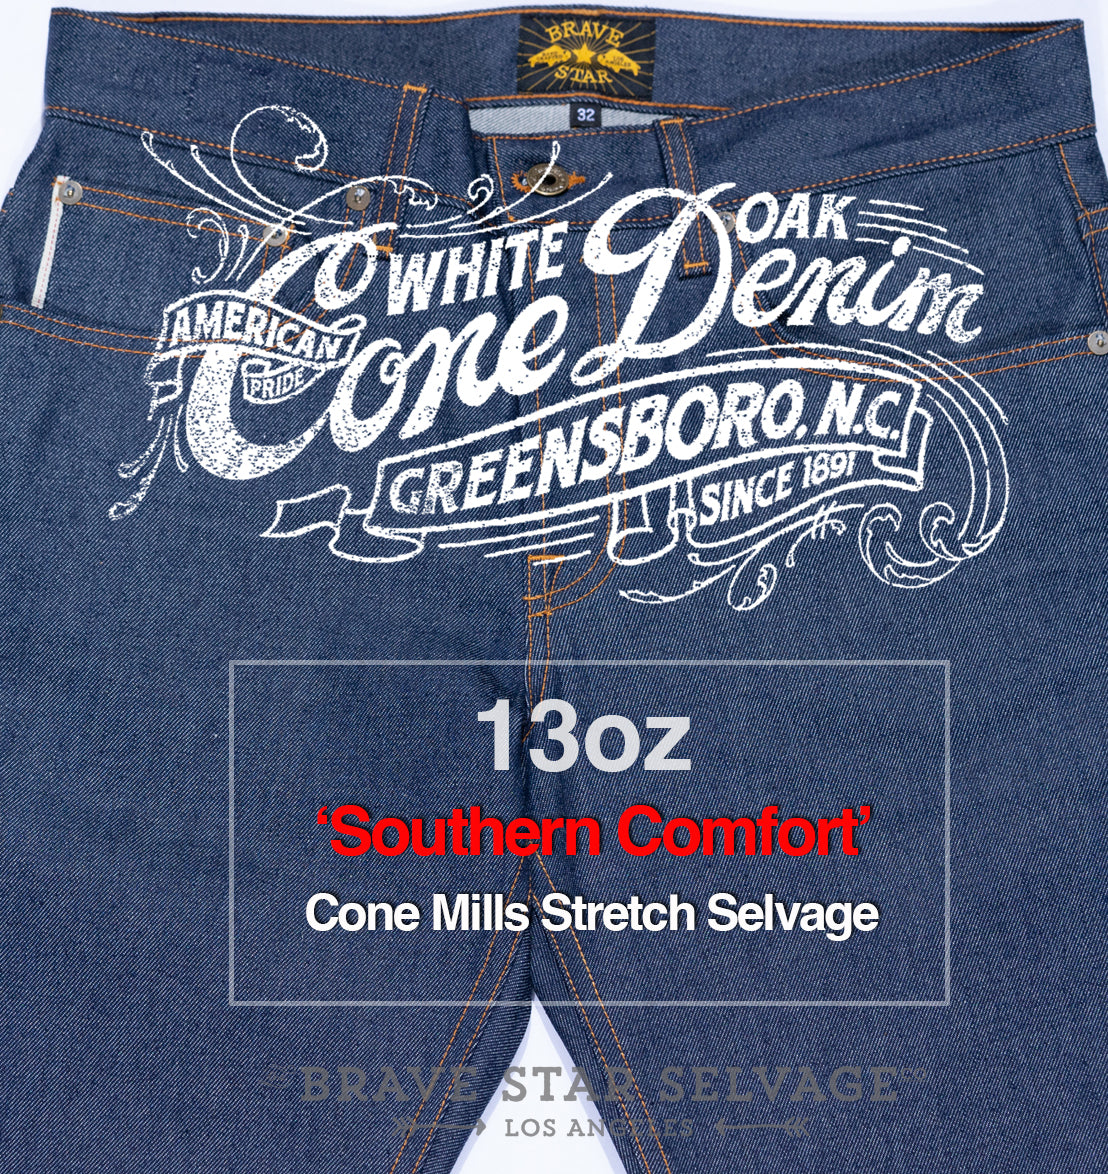 The True Straight 13oz 'Southern Comfort' Cone Mills Stretch Selvage